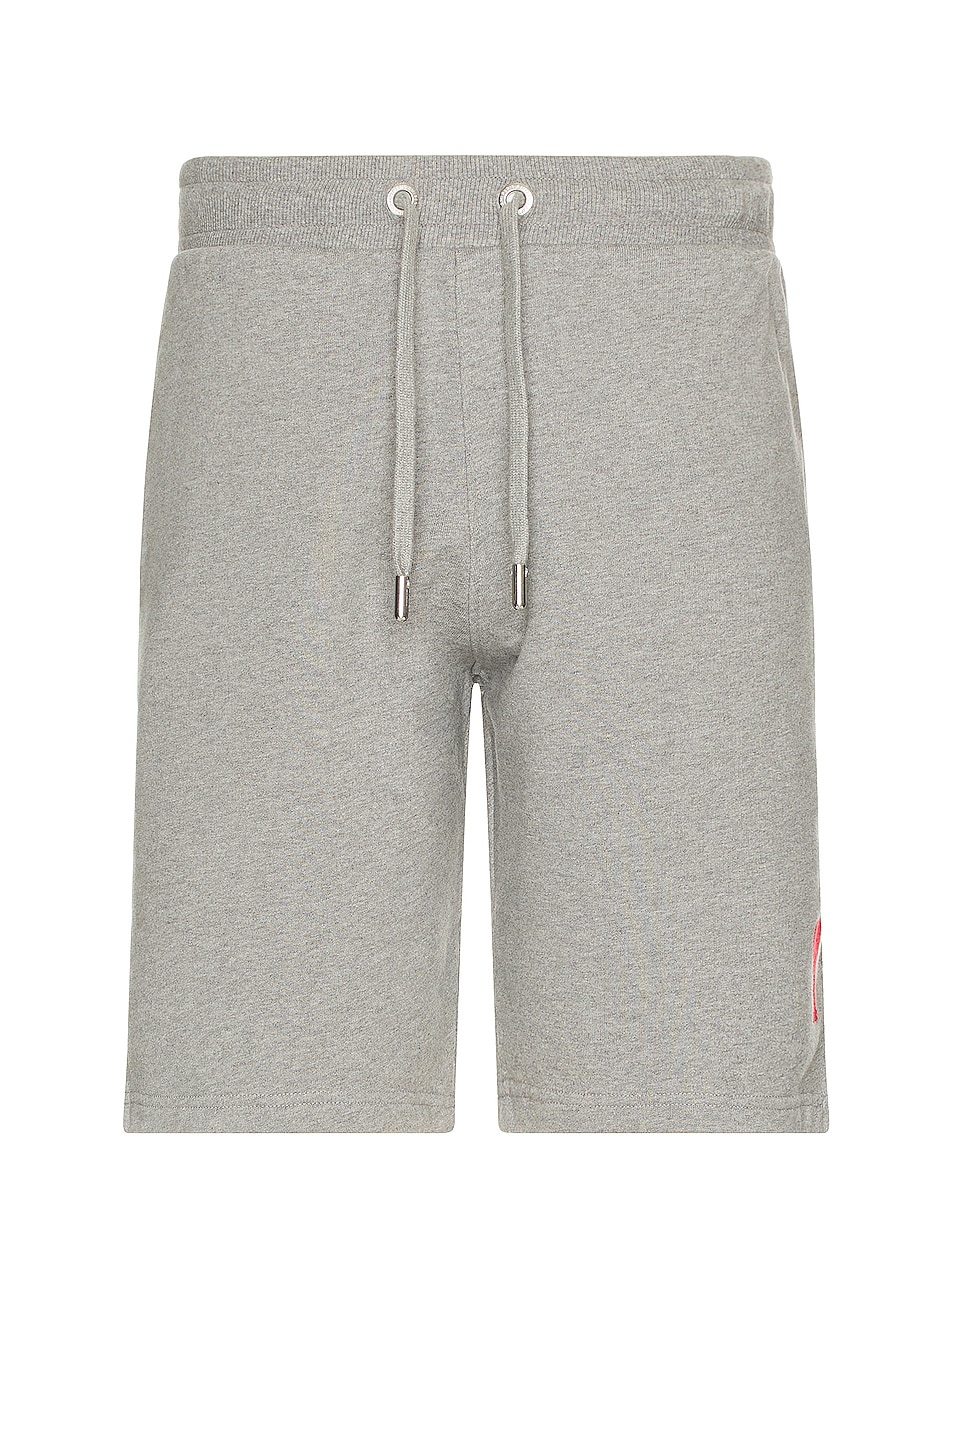 Adc Short in Grey